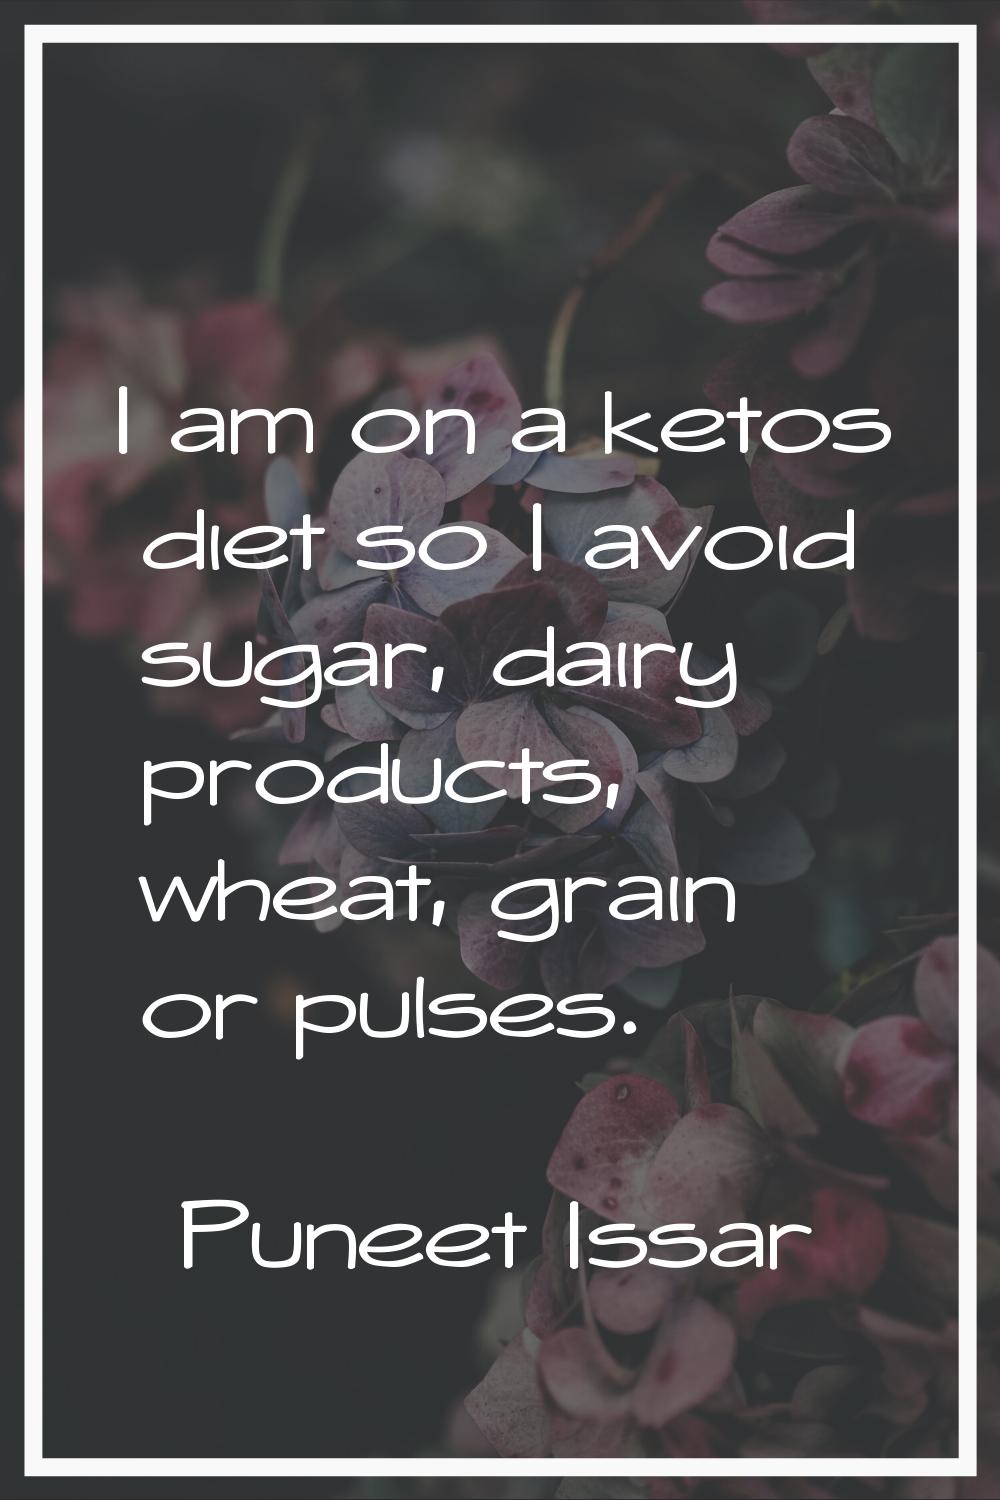 I am on a ketos diet so I avoid sugar, dairy products, wheat, grain or pulses.